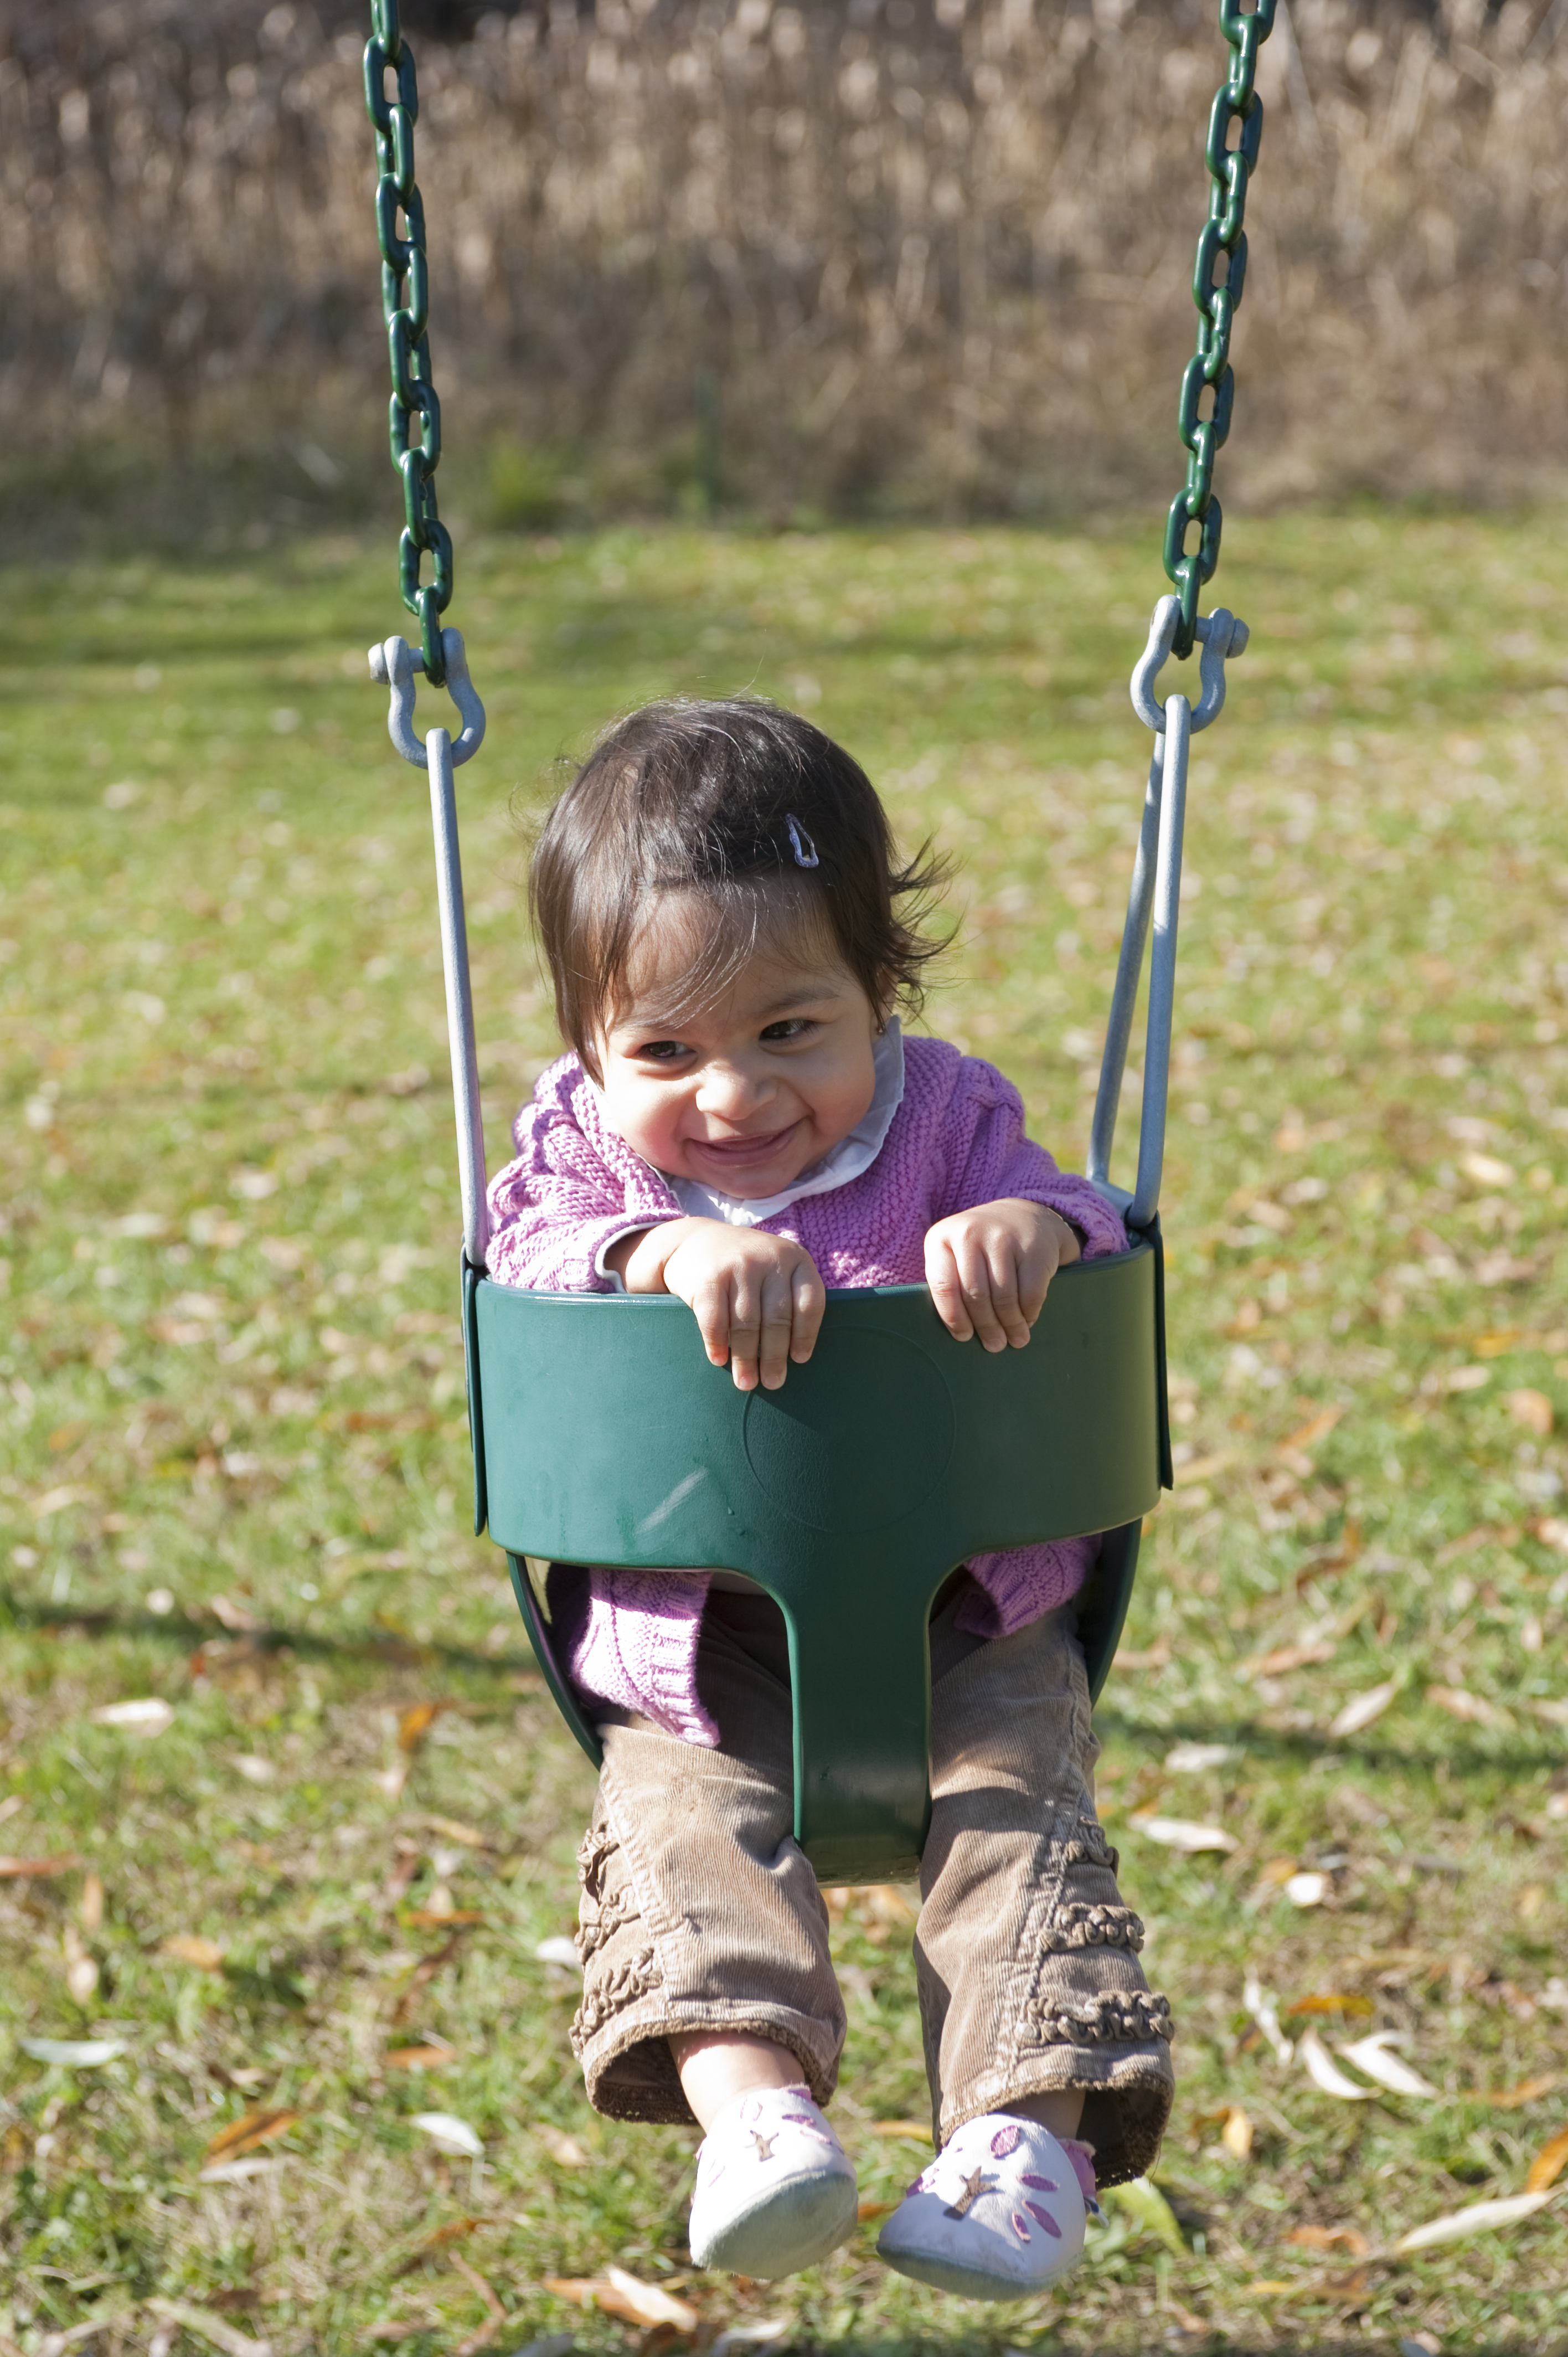 Do I Need a Baby Swing? The Benefits of Using a Baby Swing